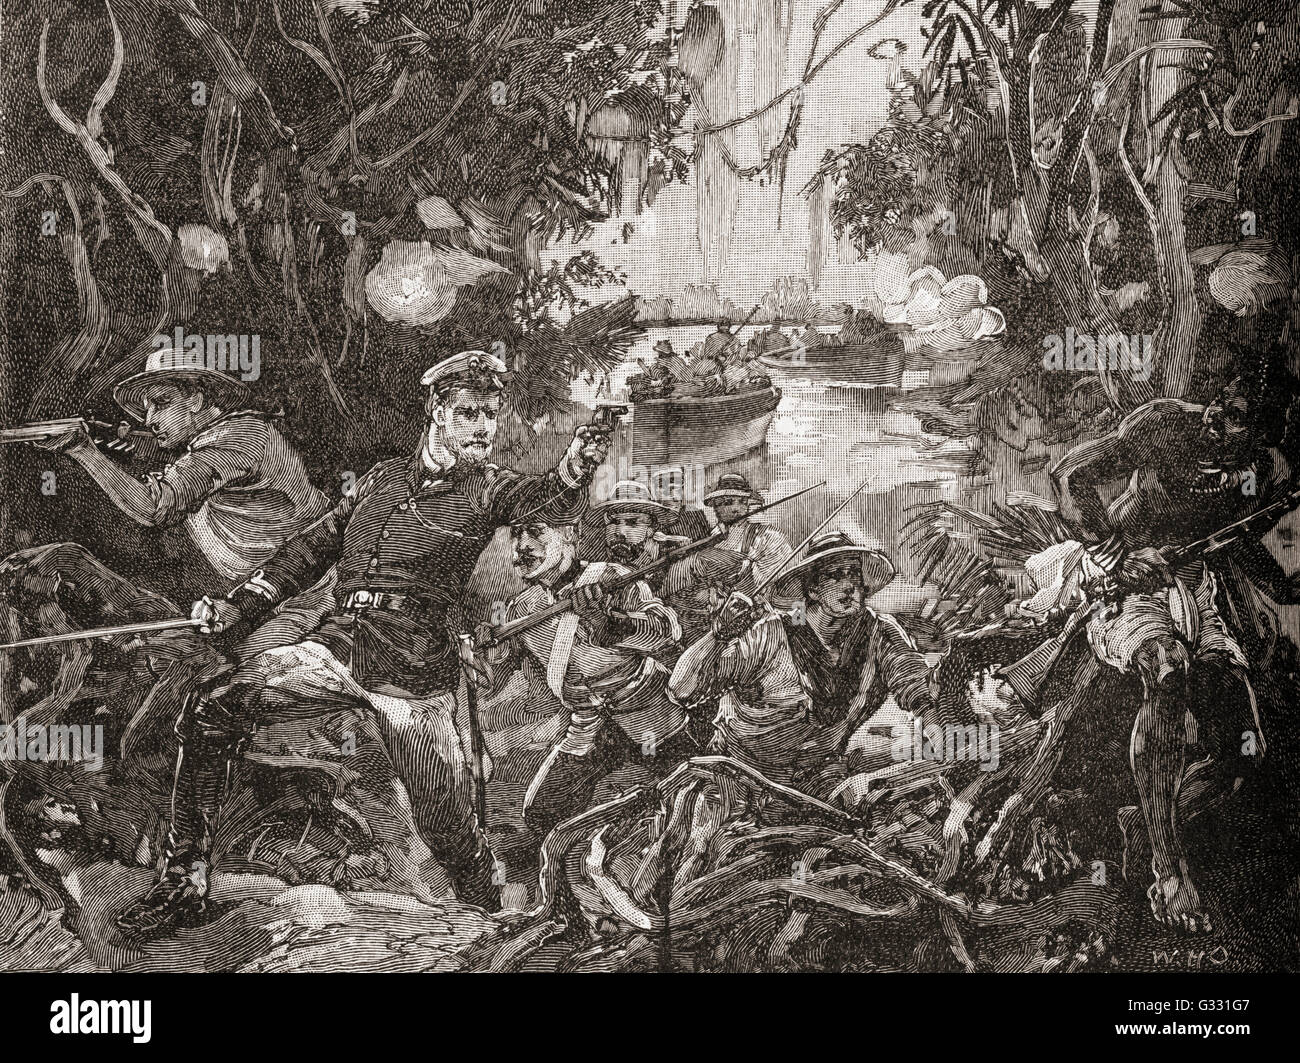 British navy punitive expedition attacking pirates who had killed crew members of the schooner Geraldine which had run aground in the Congo, 1875. Stock Photo